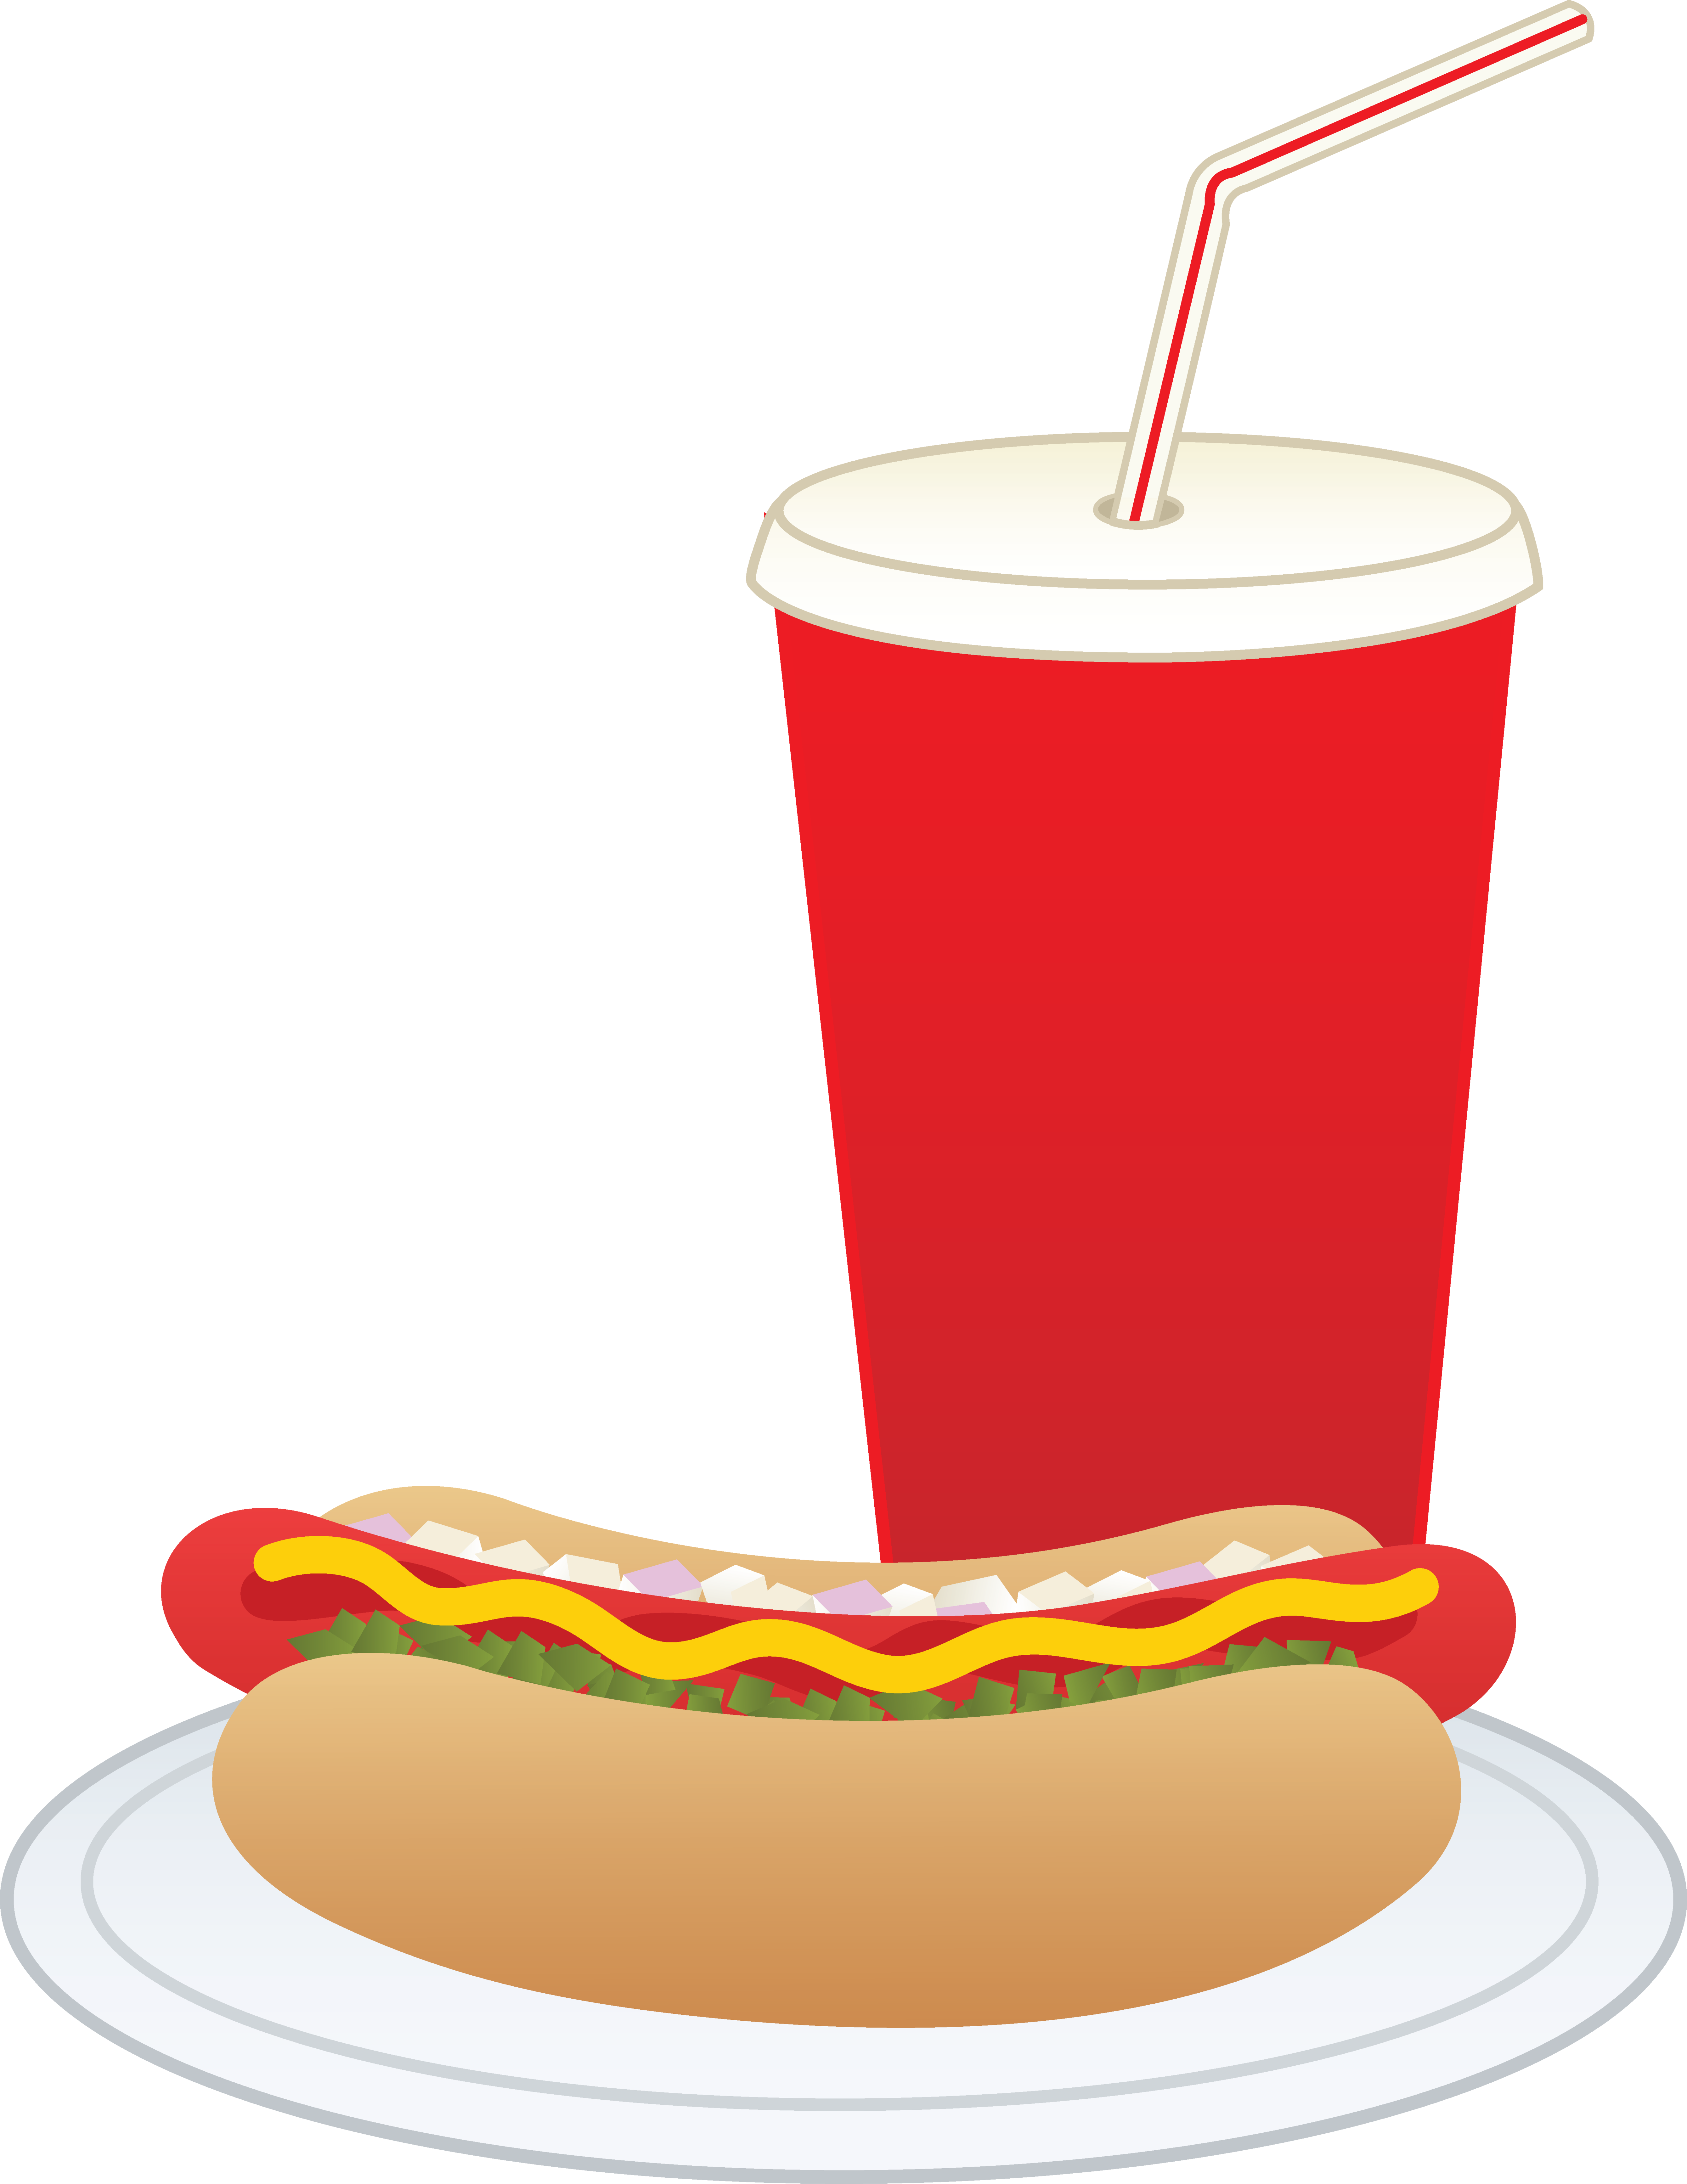 Hot dog and drink clipart